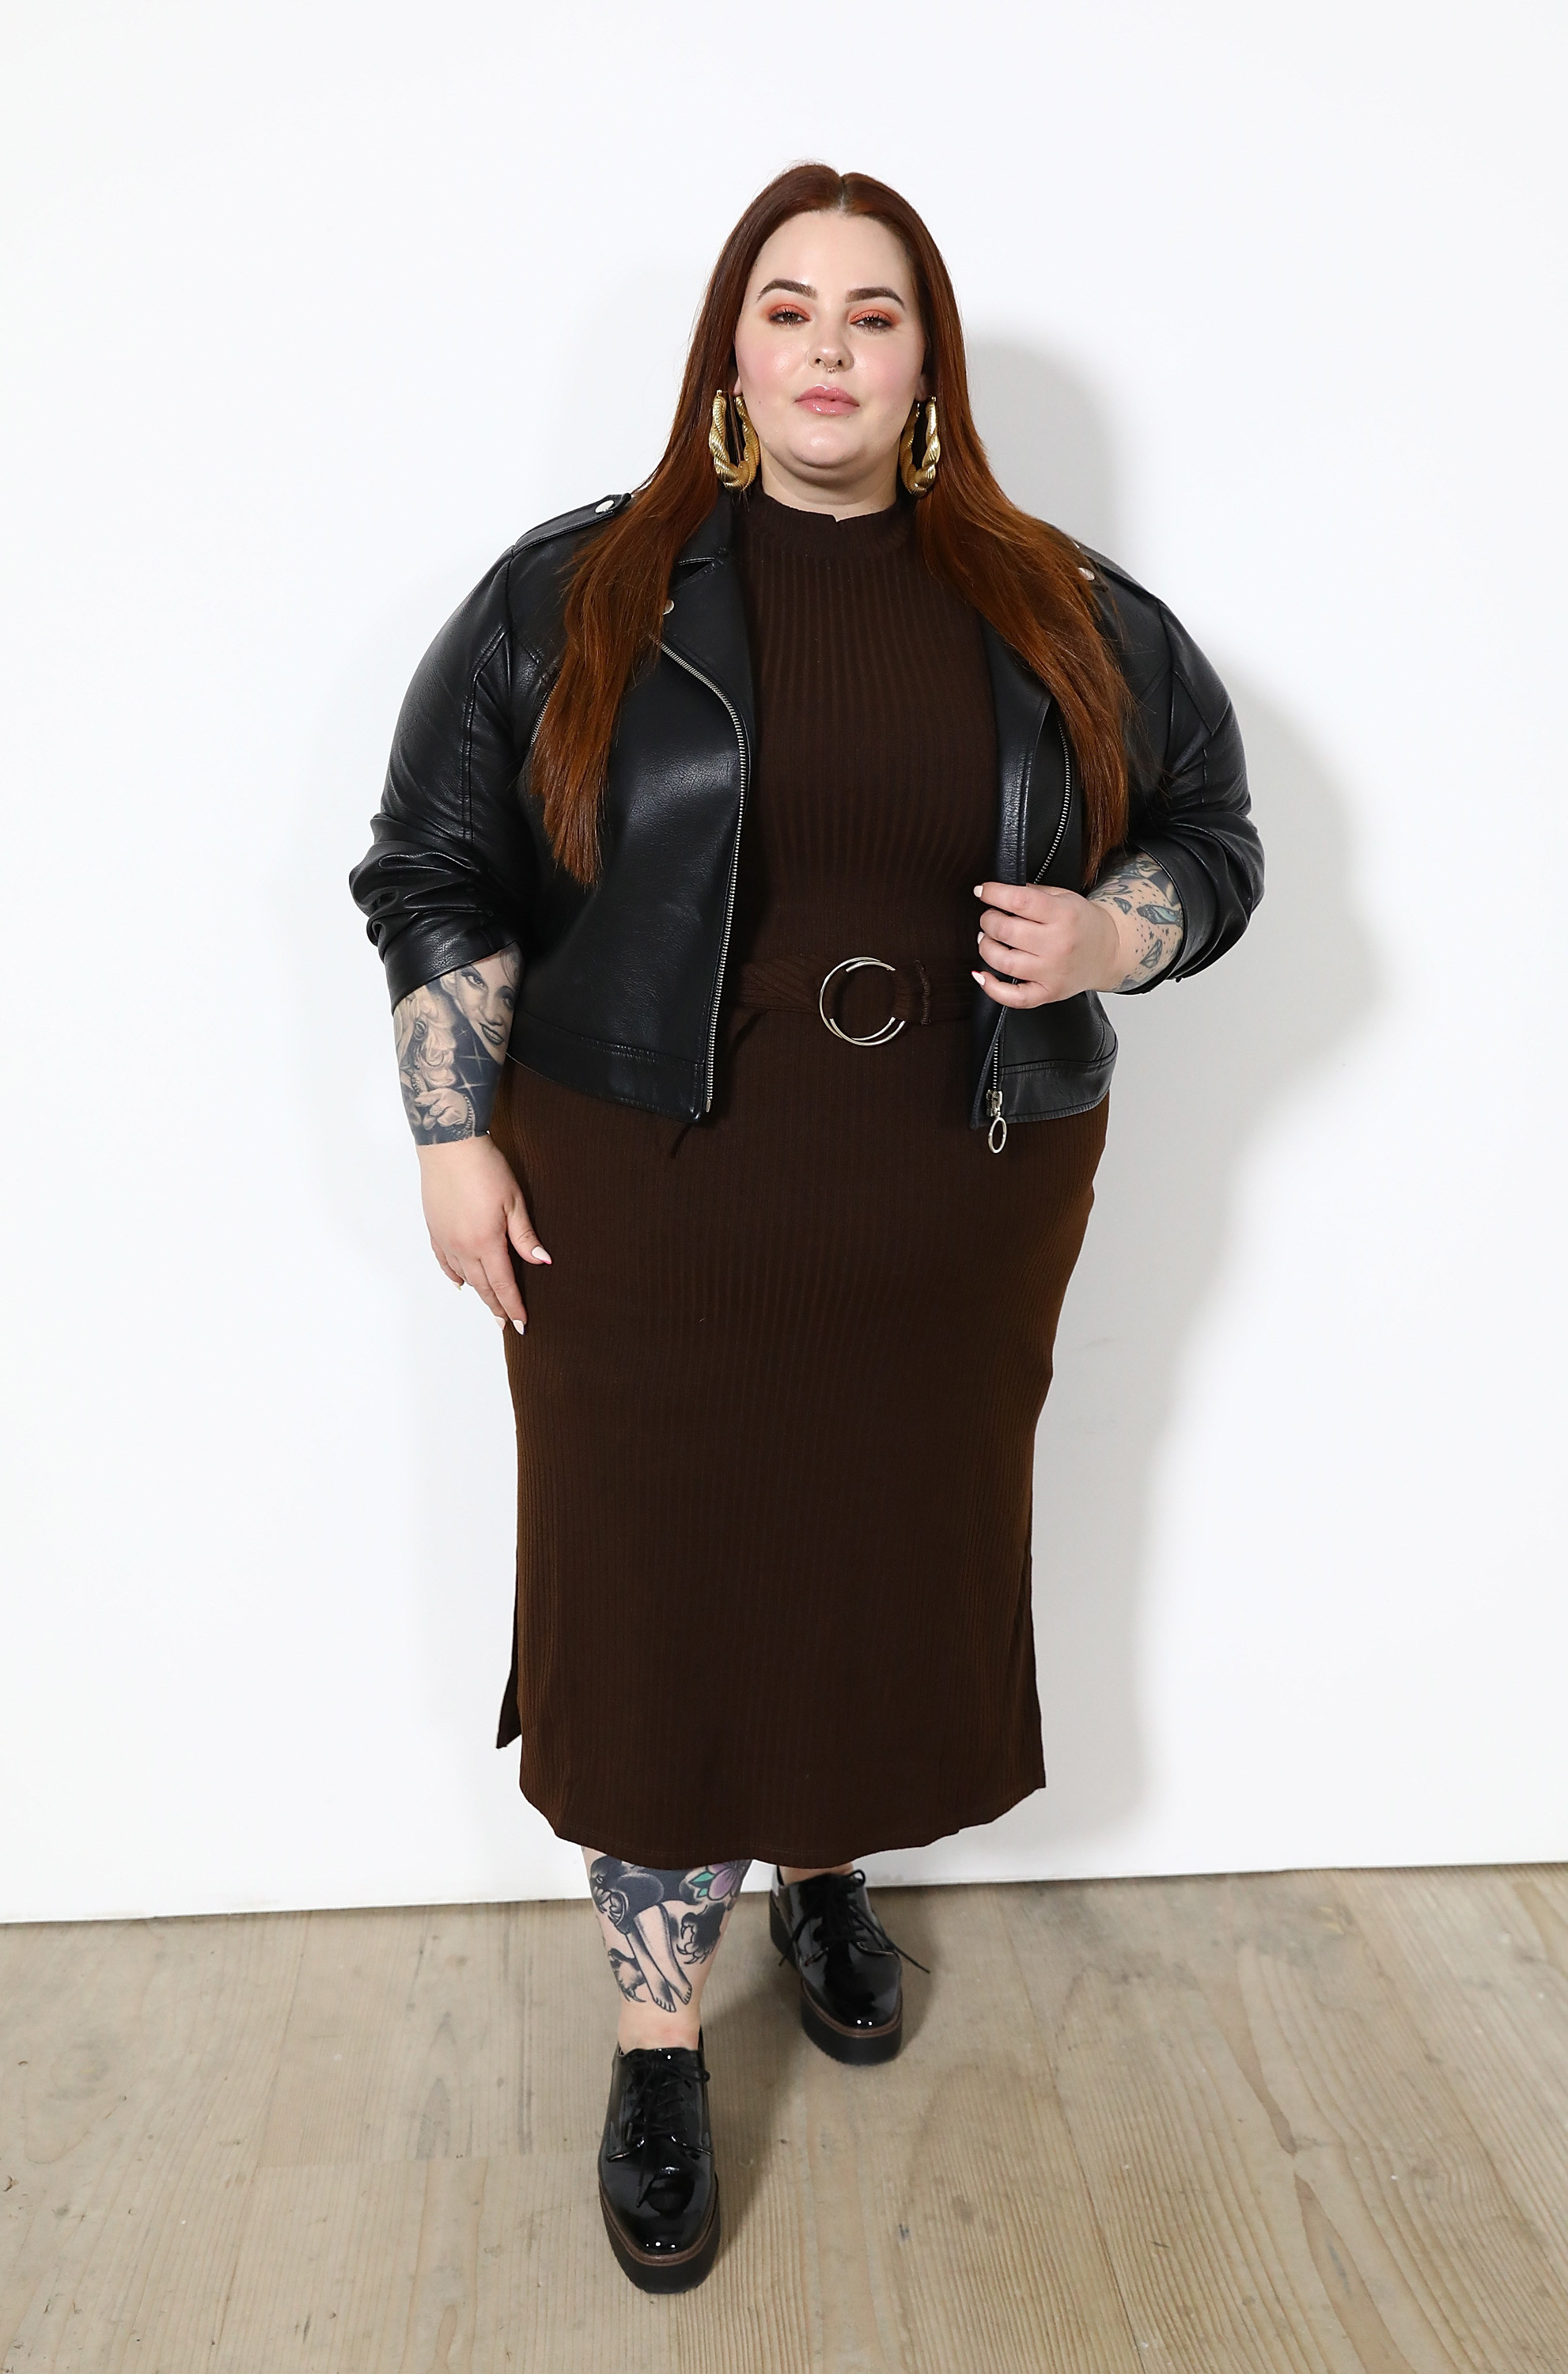 Tess Holliday in a brown dress and black leather jacket